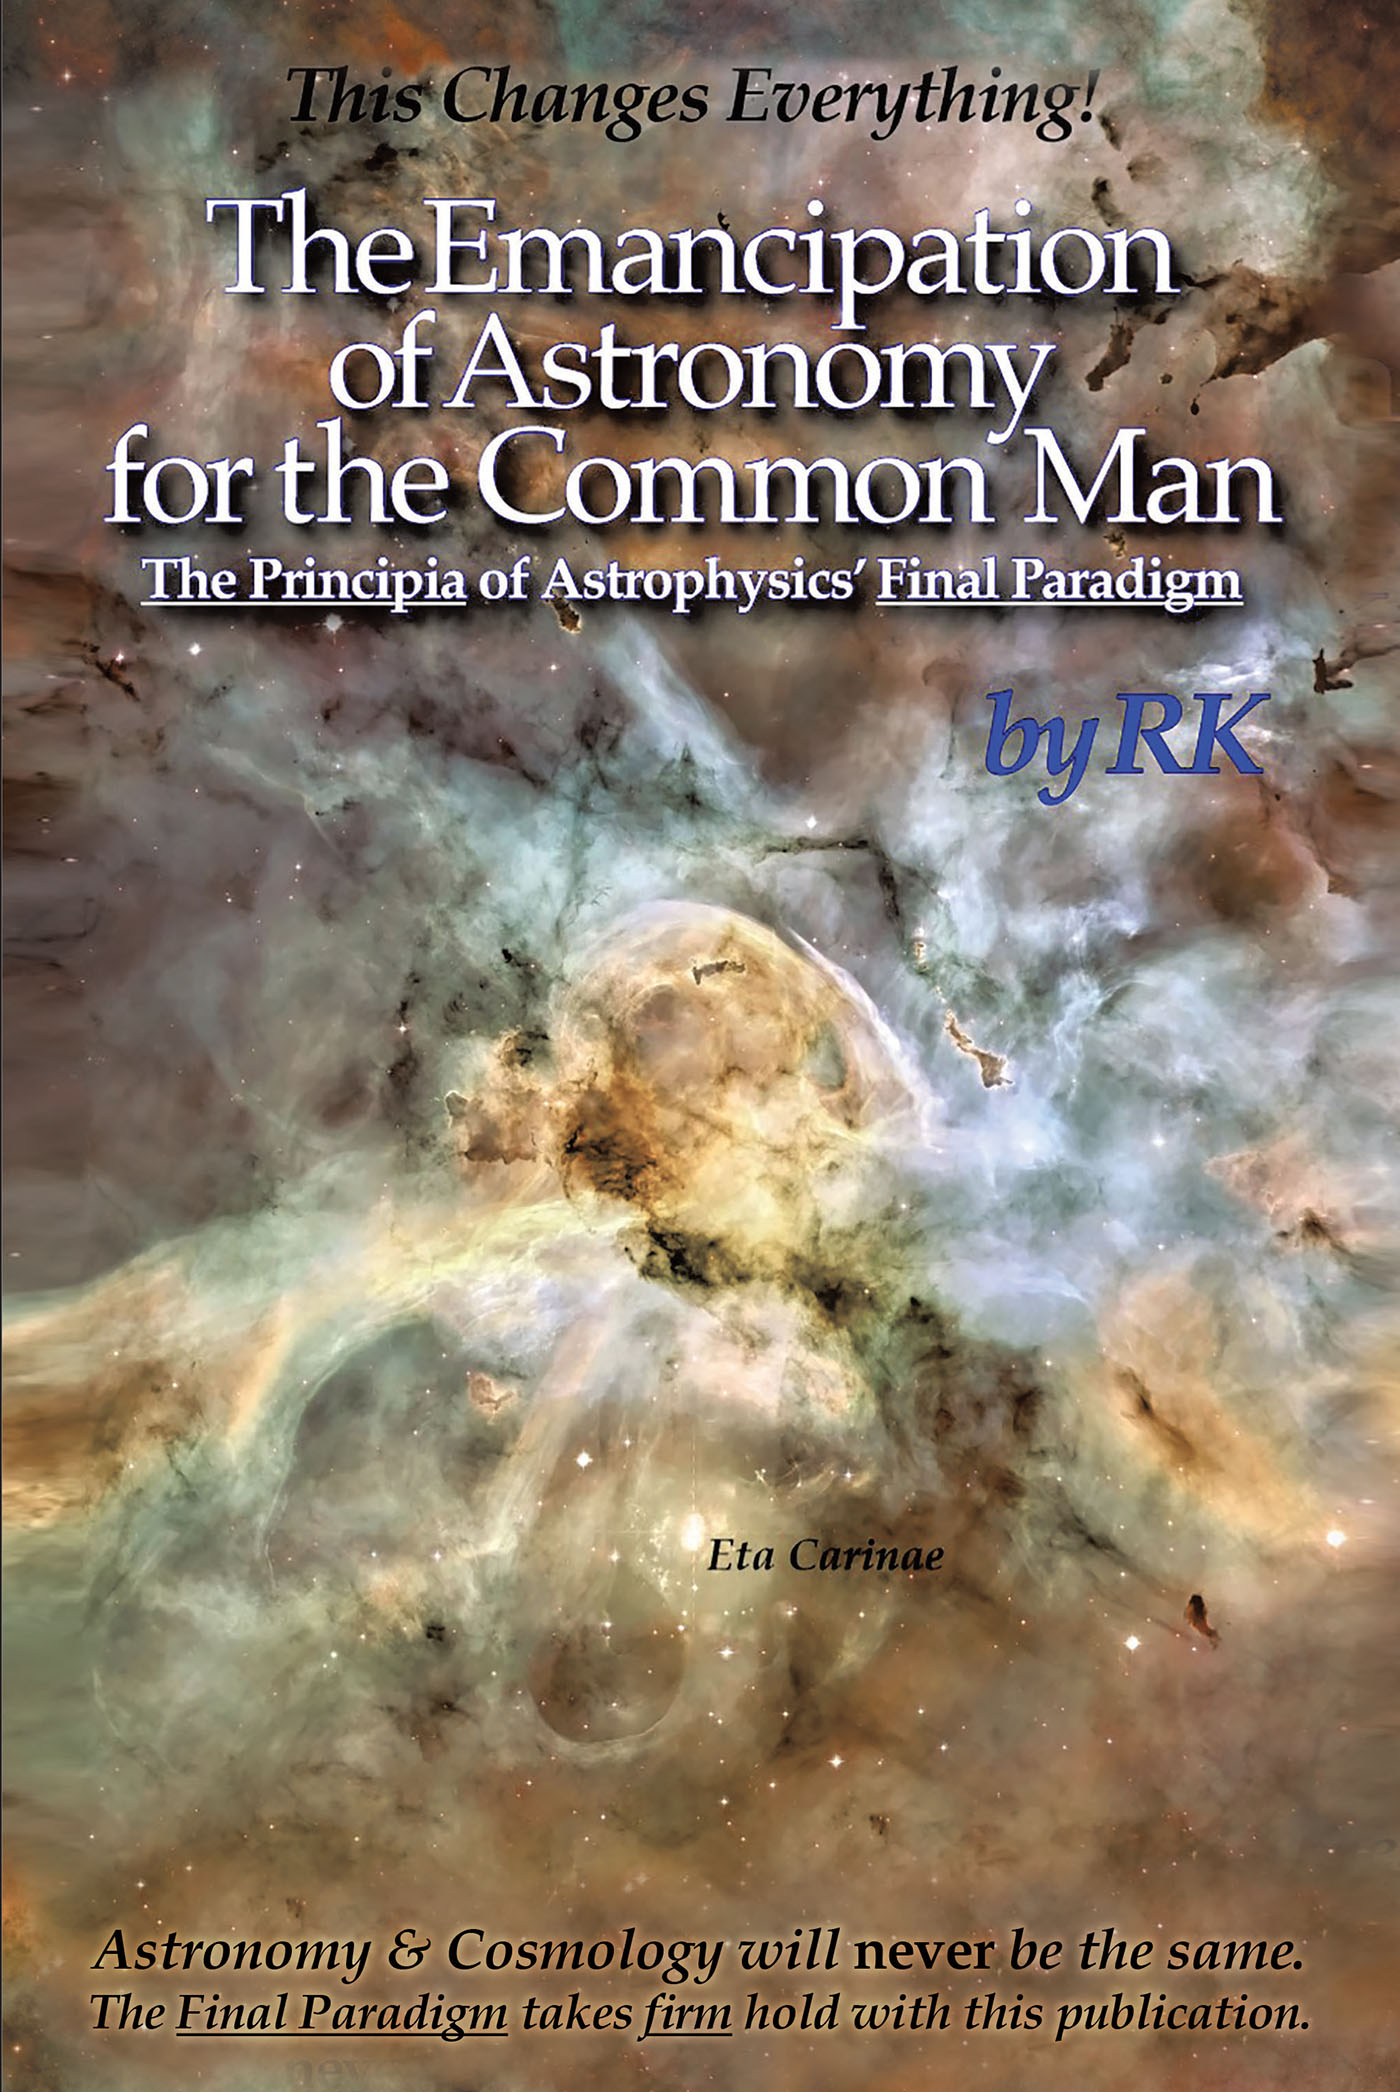 RK’s Newly Released “The Emancipation of Astronomy for the Common Man” is a Helpful Resource for Anyone with an Interest in Astrophysics